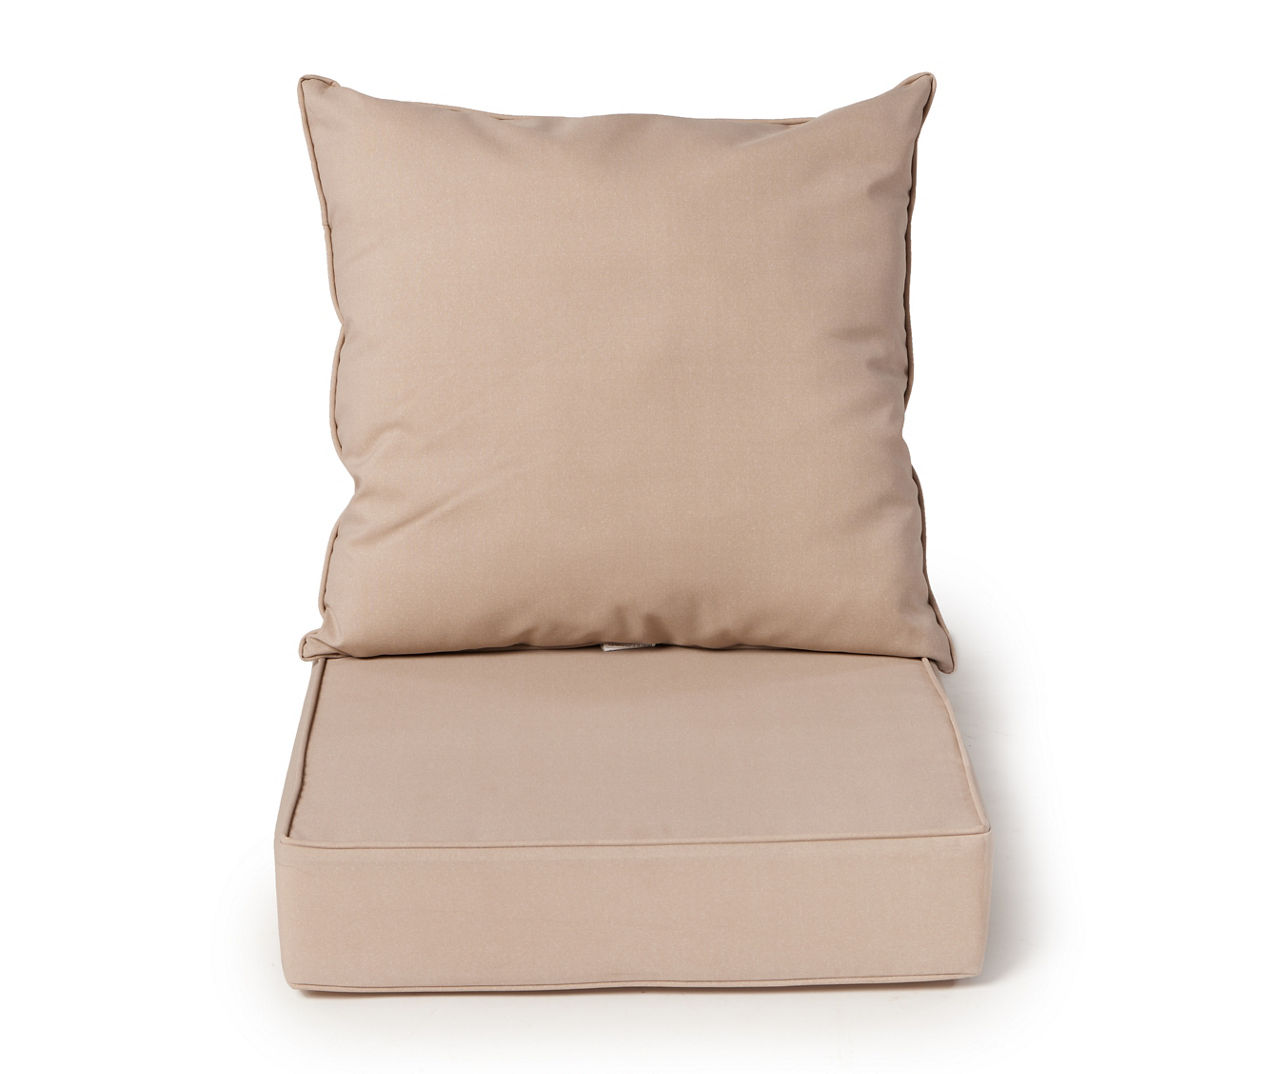 Better Homes & Gardens Decorative Throw Pillow, Paws for Love , Oblong,  Tan, 14 x 20, 1Pack 